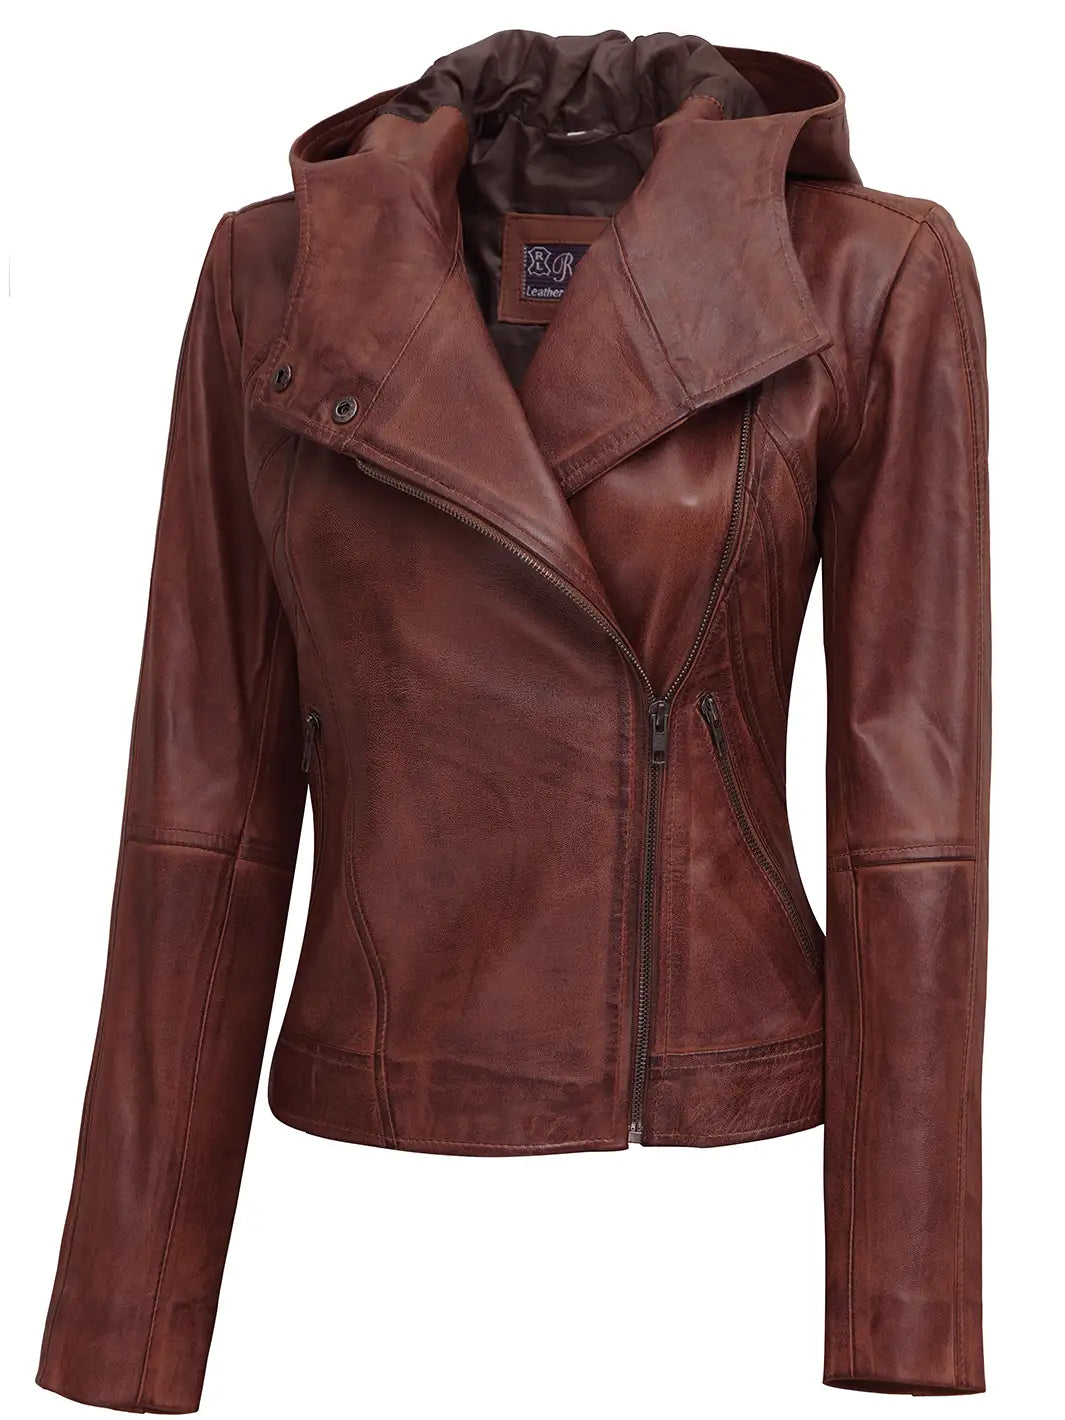 Womens leather jacket with hood